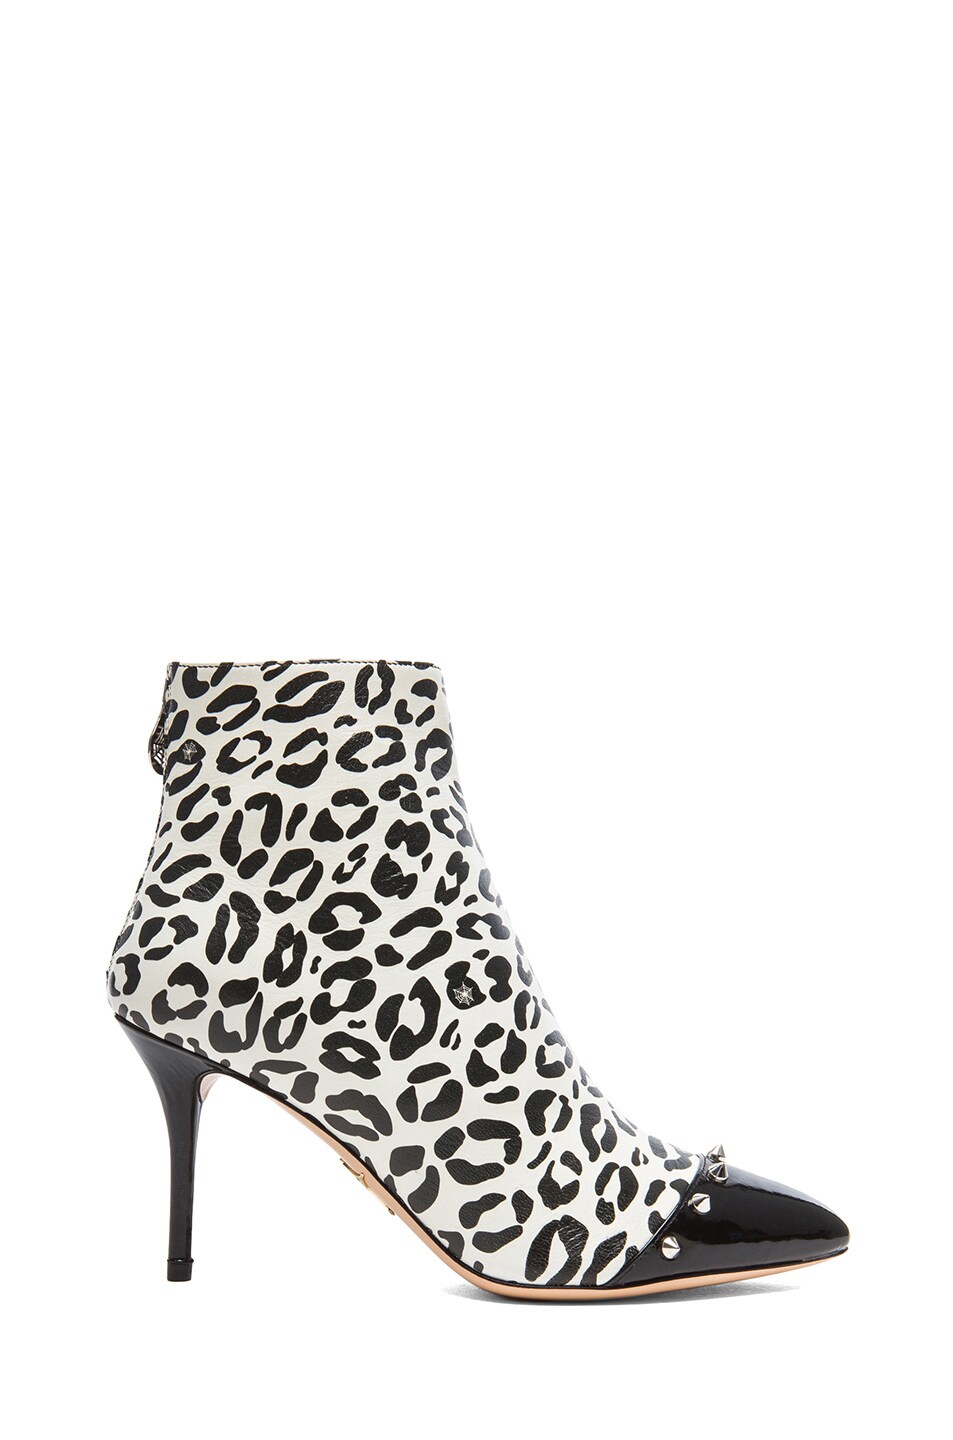 Image 1 of Charlotte Olympia Myrtle Booties in Whipped Cream Leopard